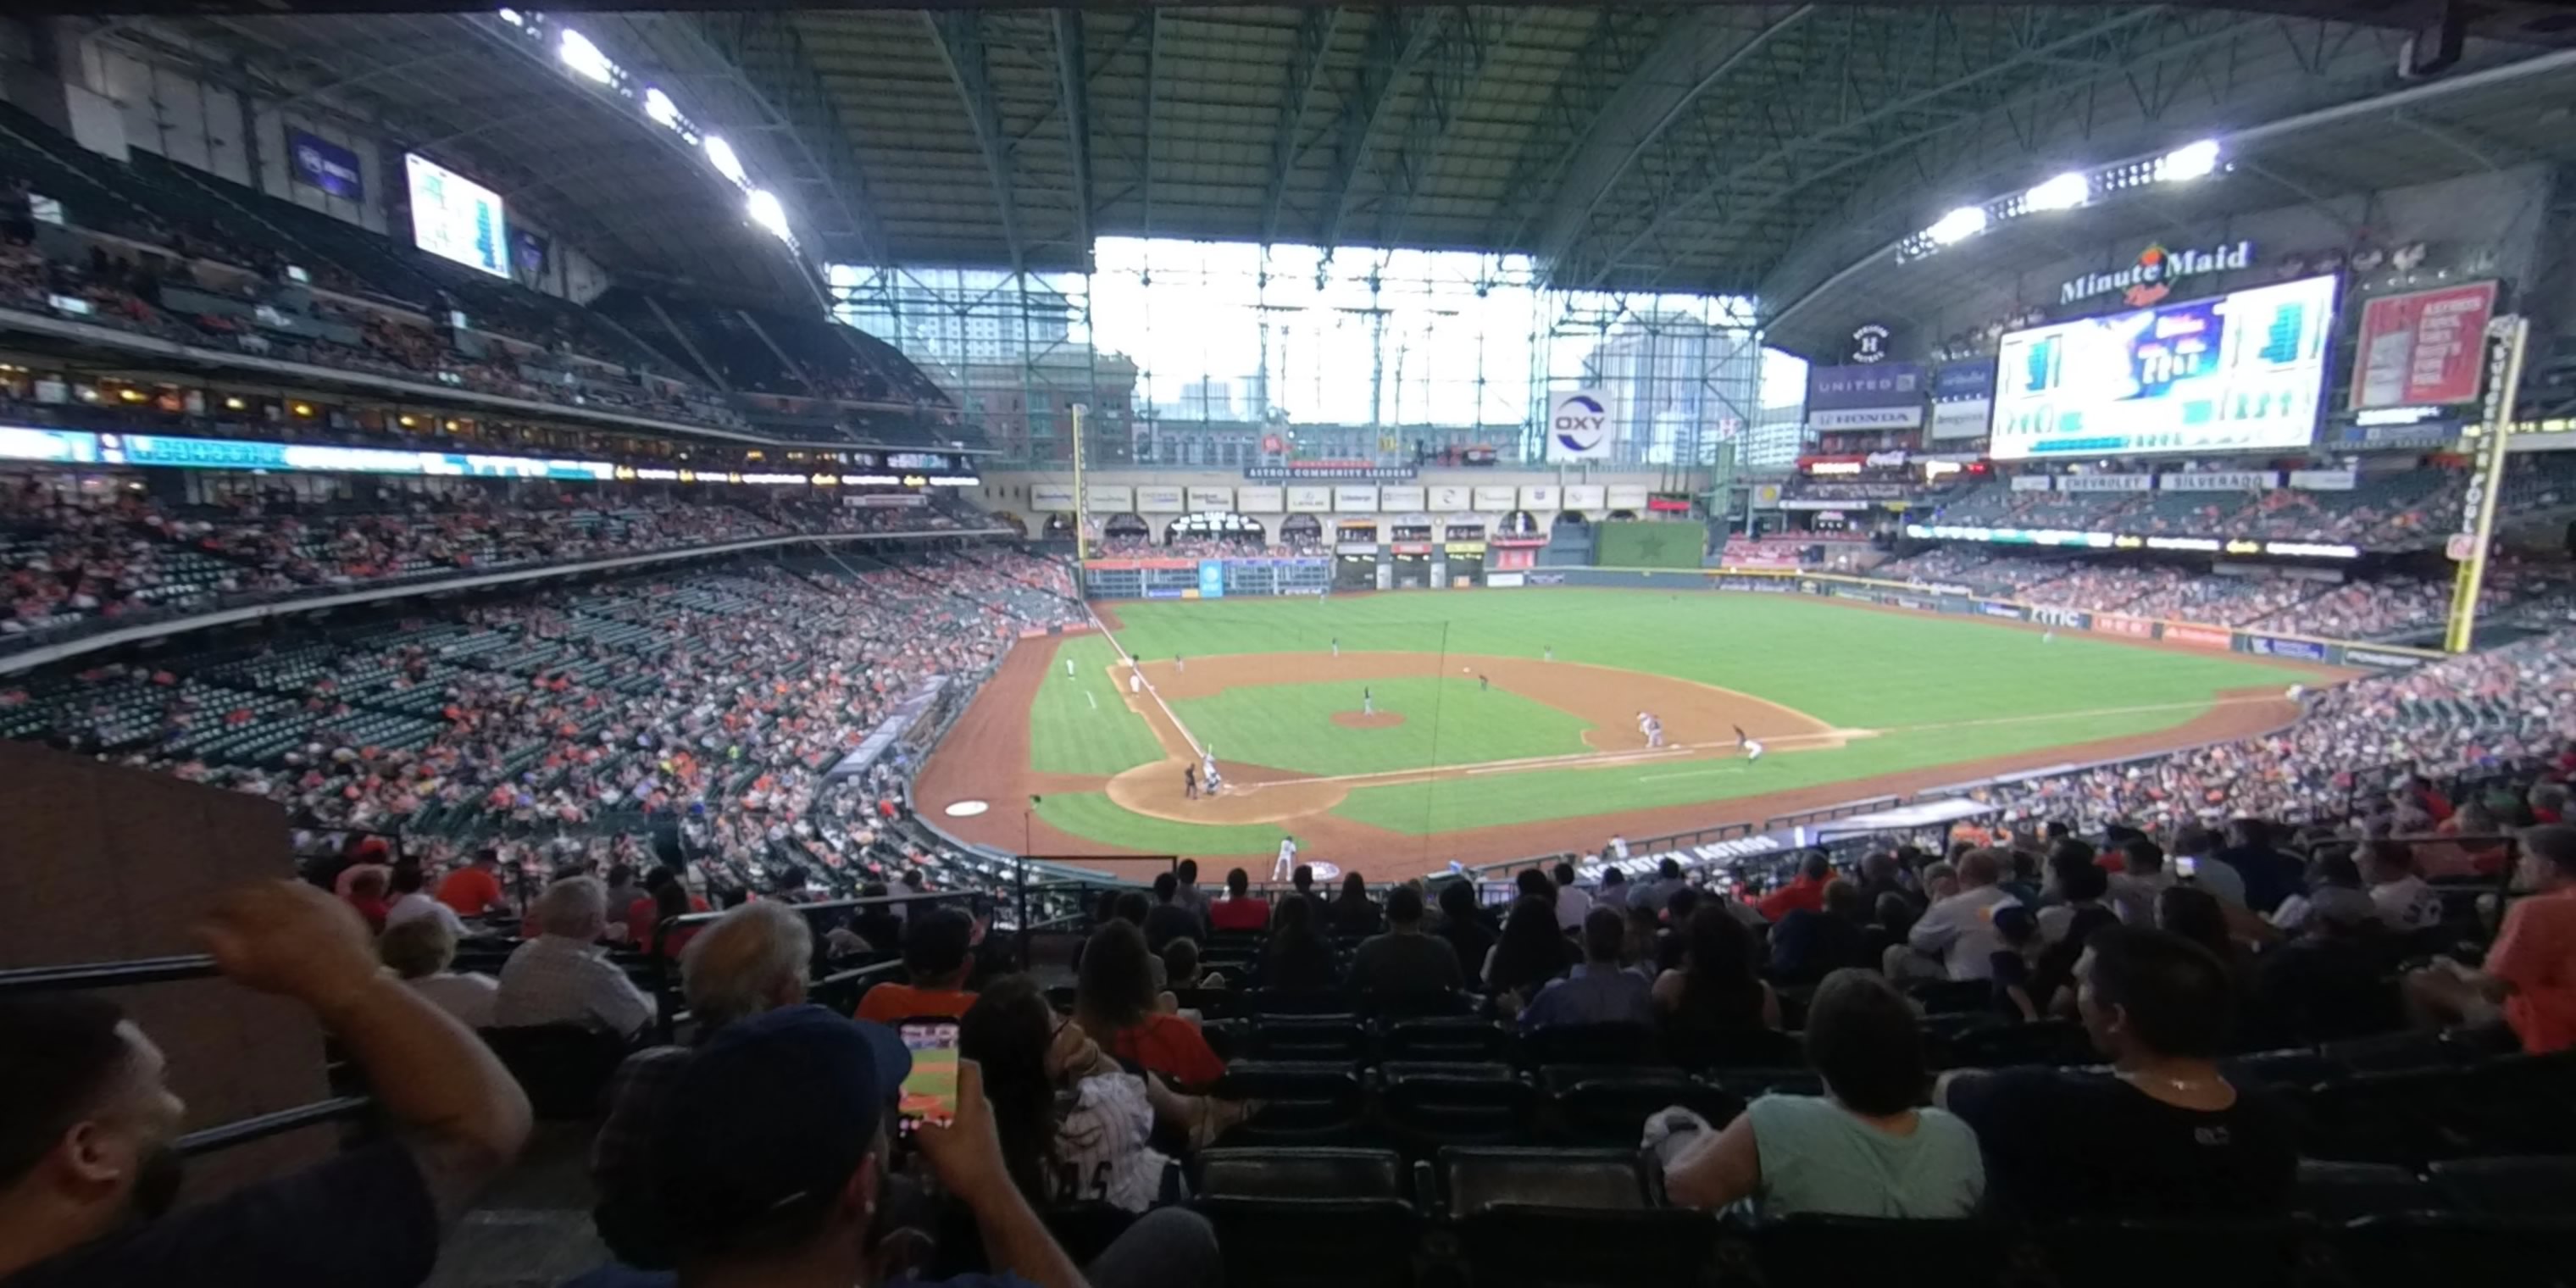 section 221 panoramic seat view  for baseball - minute maid park